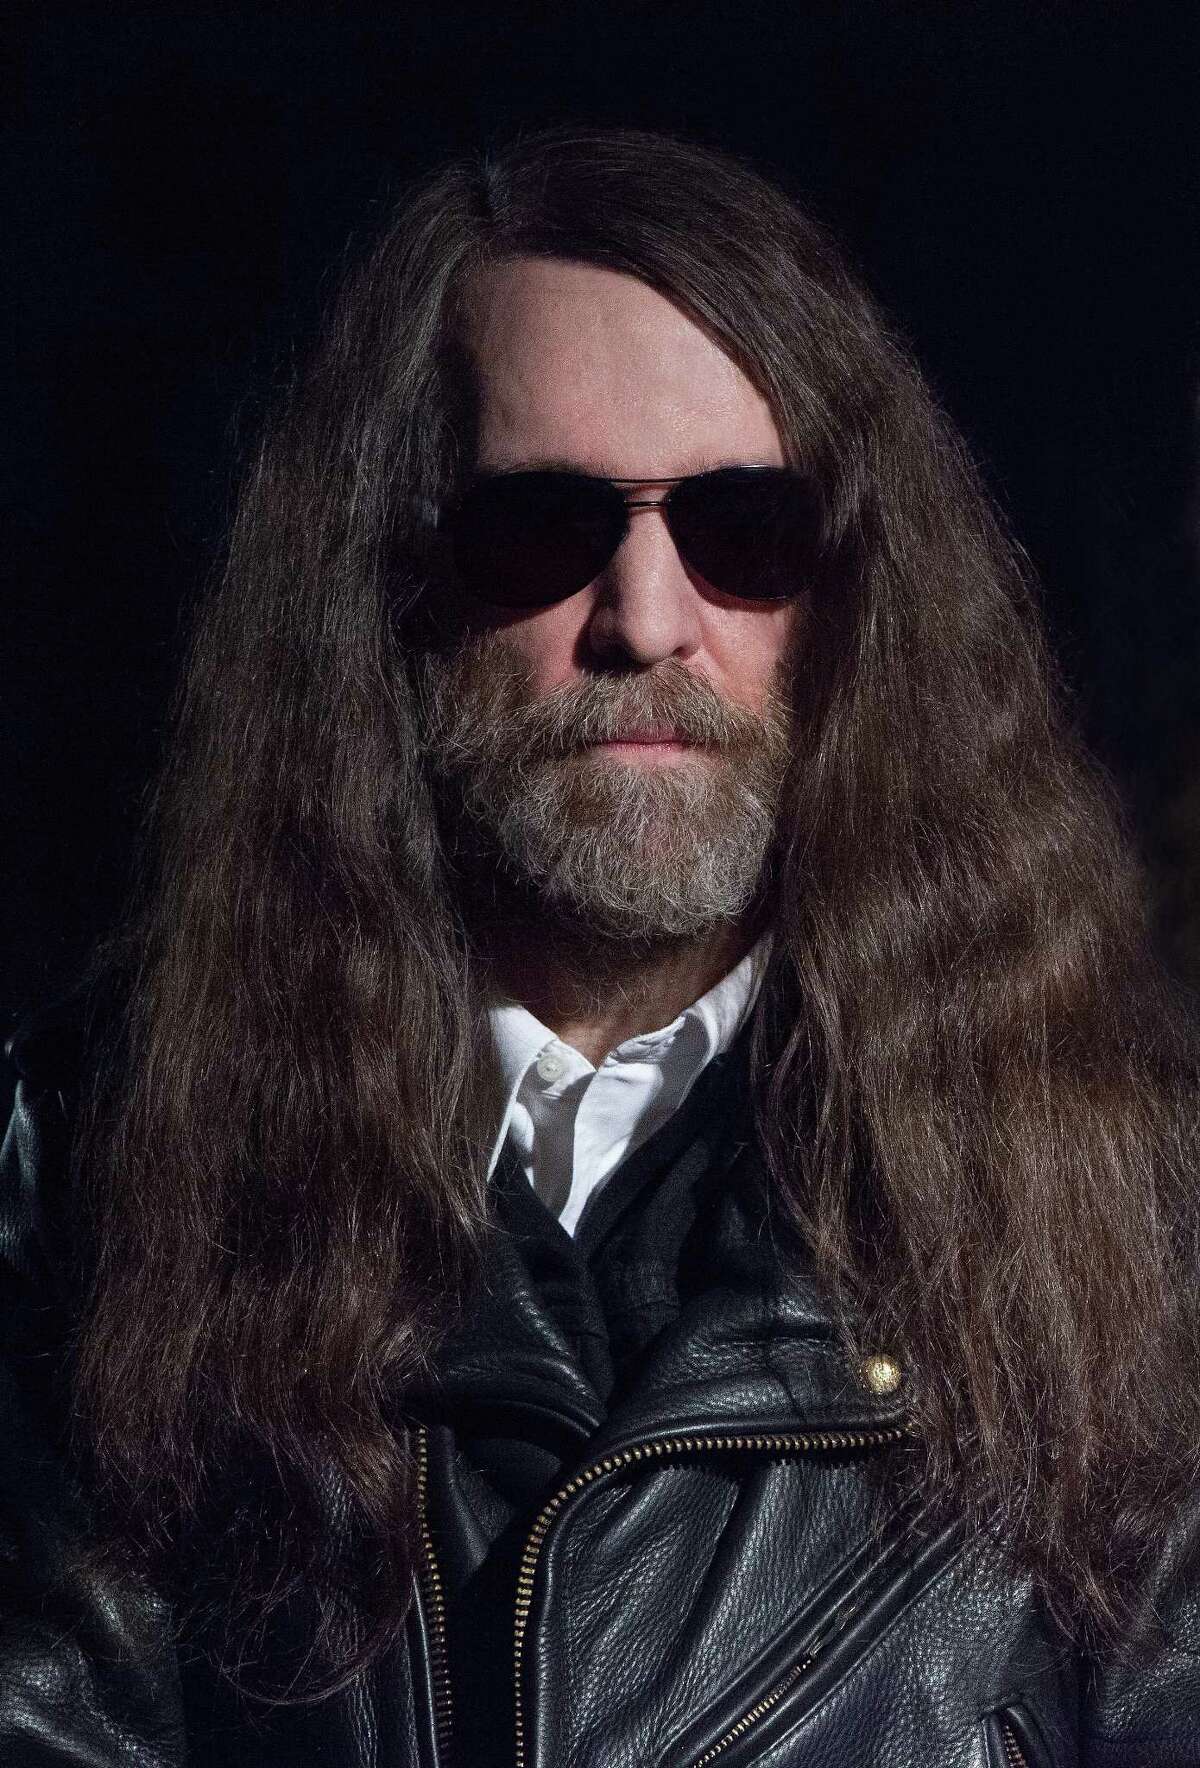 The late Paul O'Neill, founder of the Trans-Siberian Orchestra.